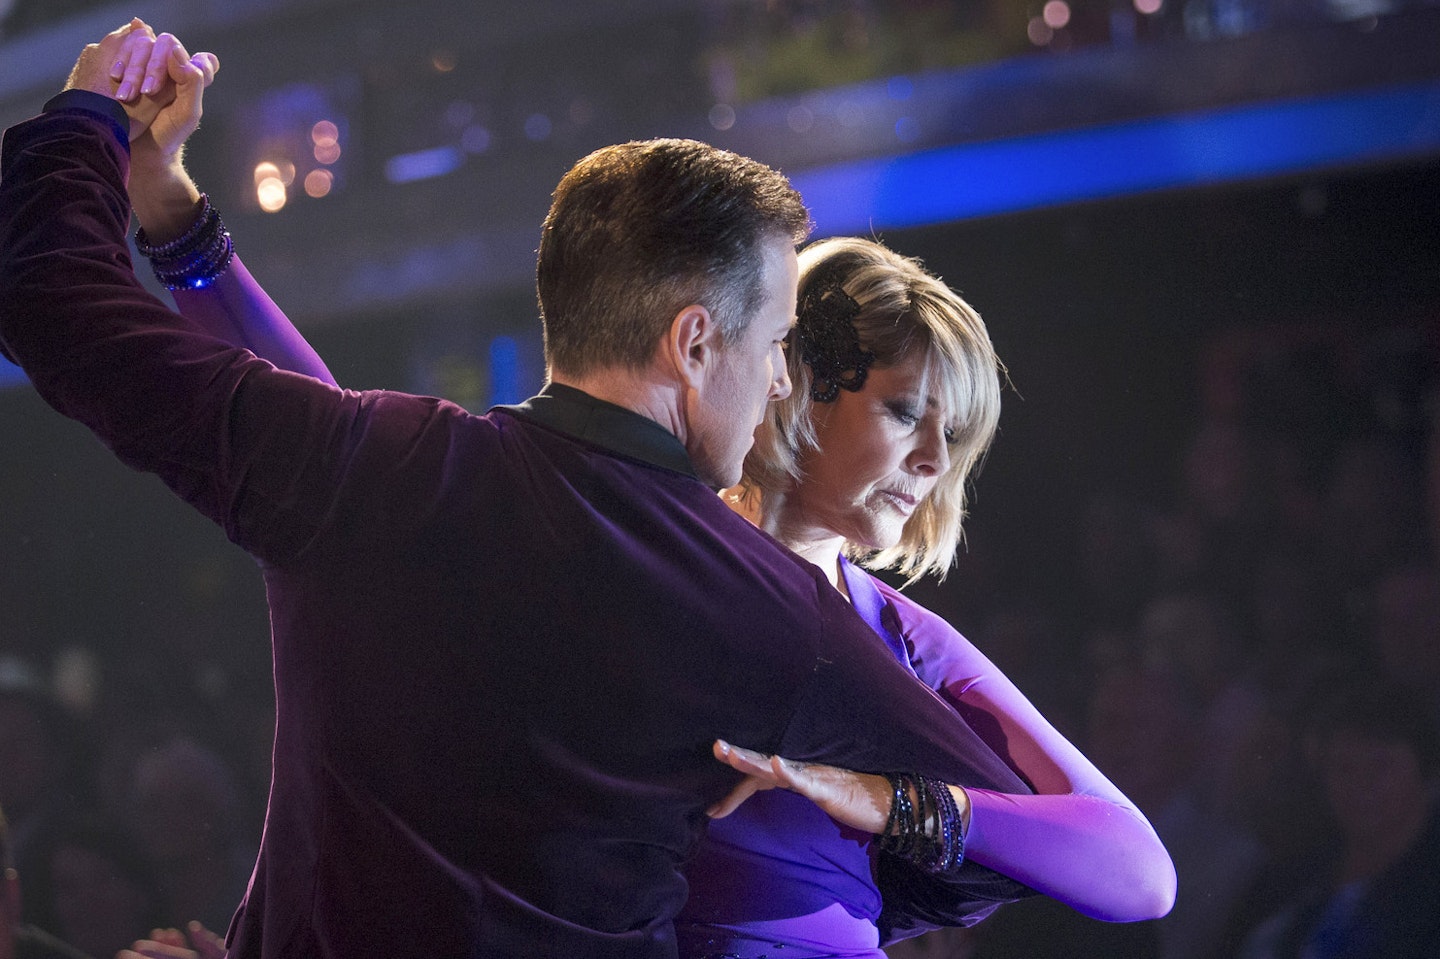 ruth-langsford-strictly-come-dancing-results-reveal-blunder